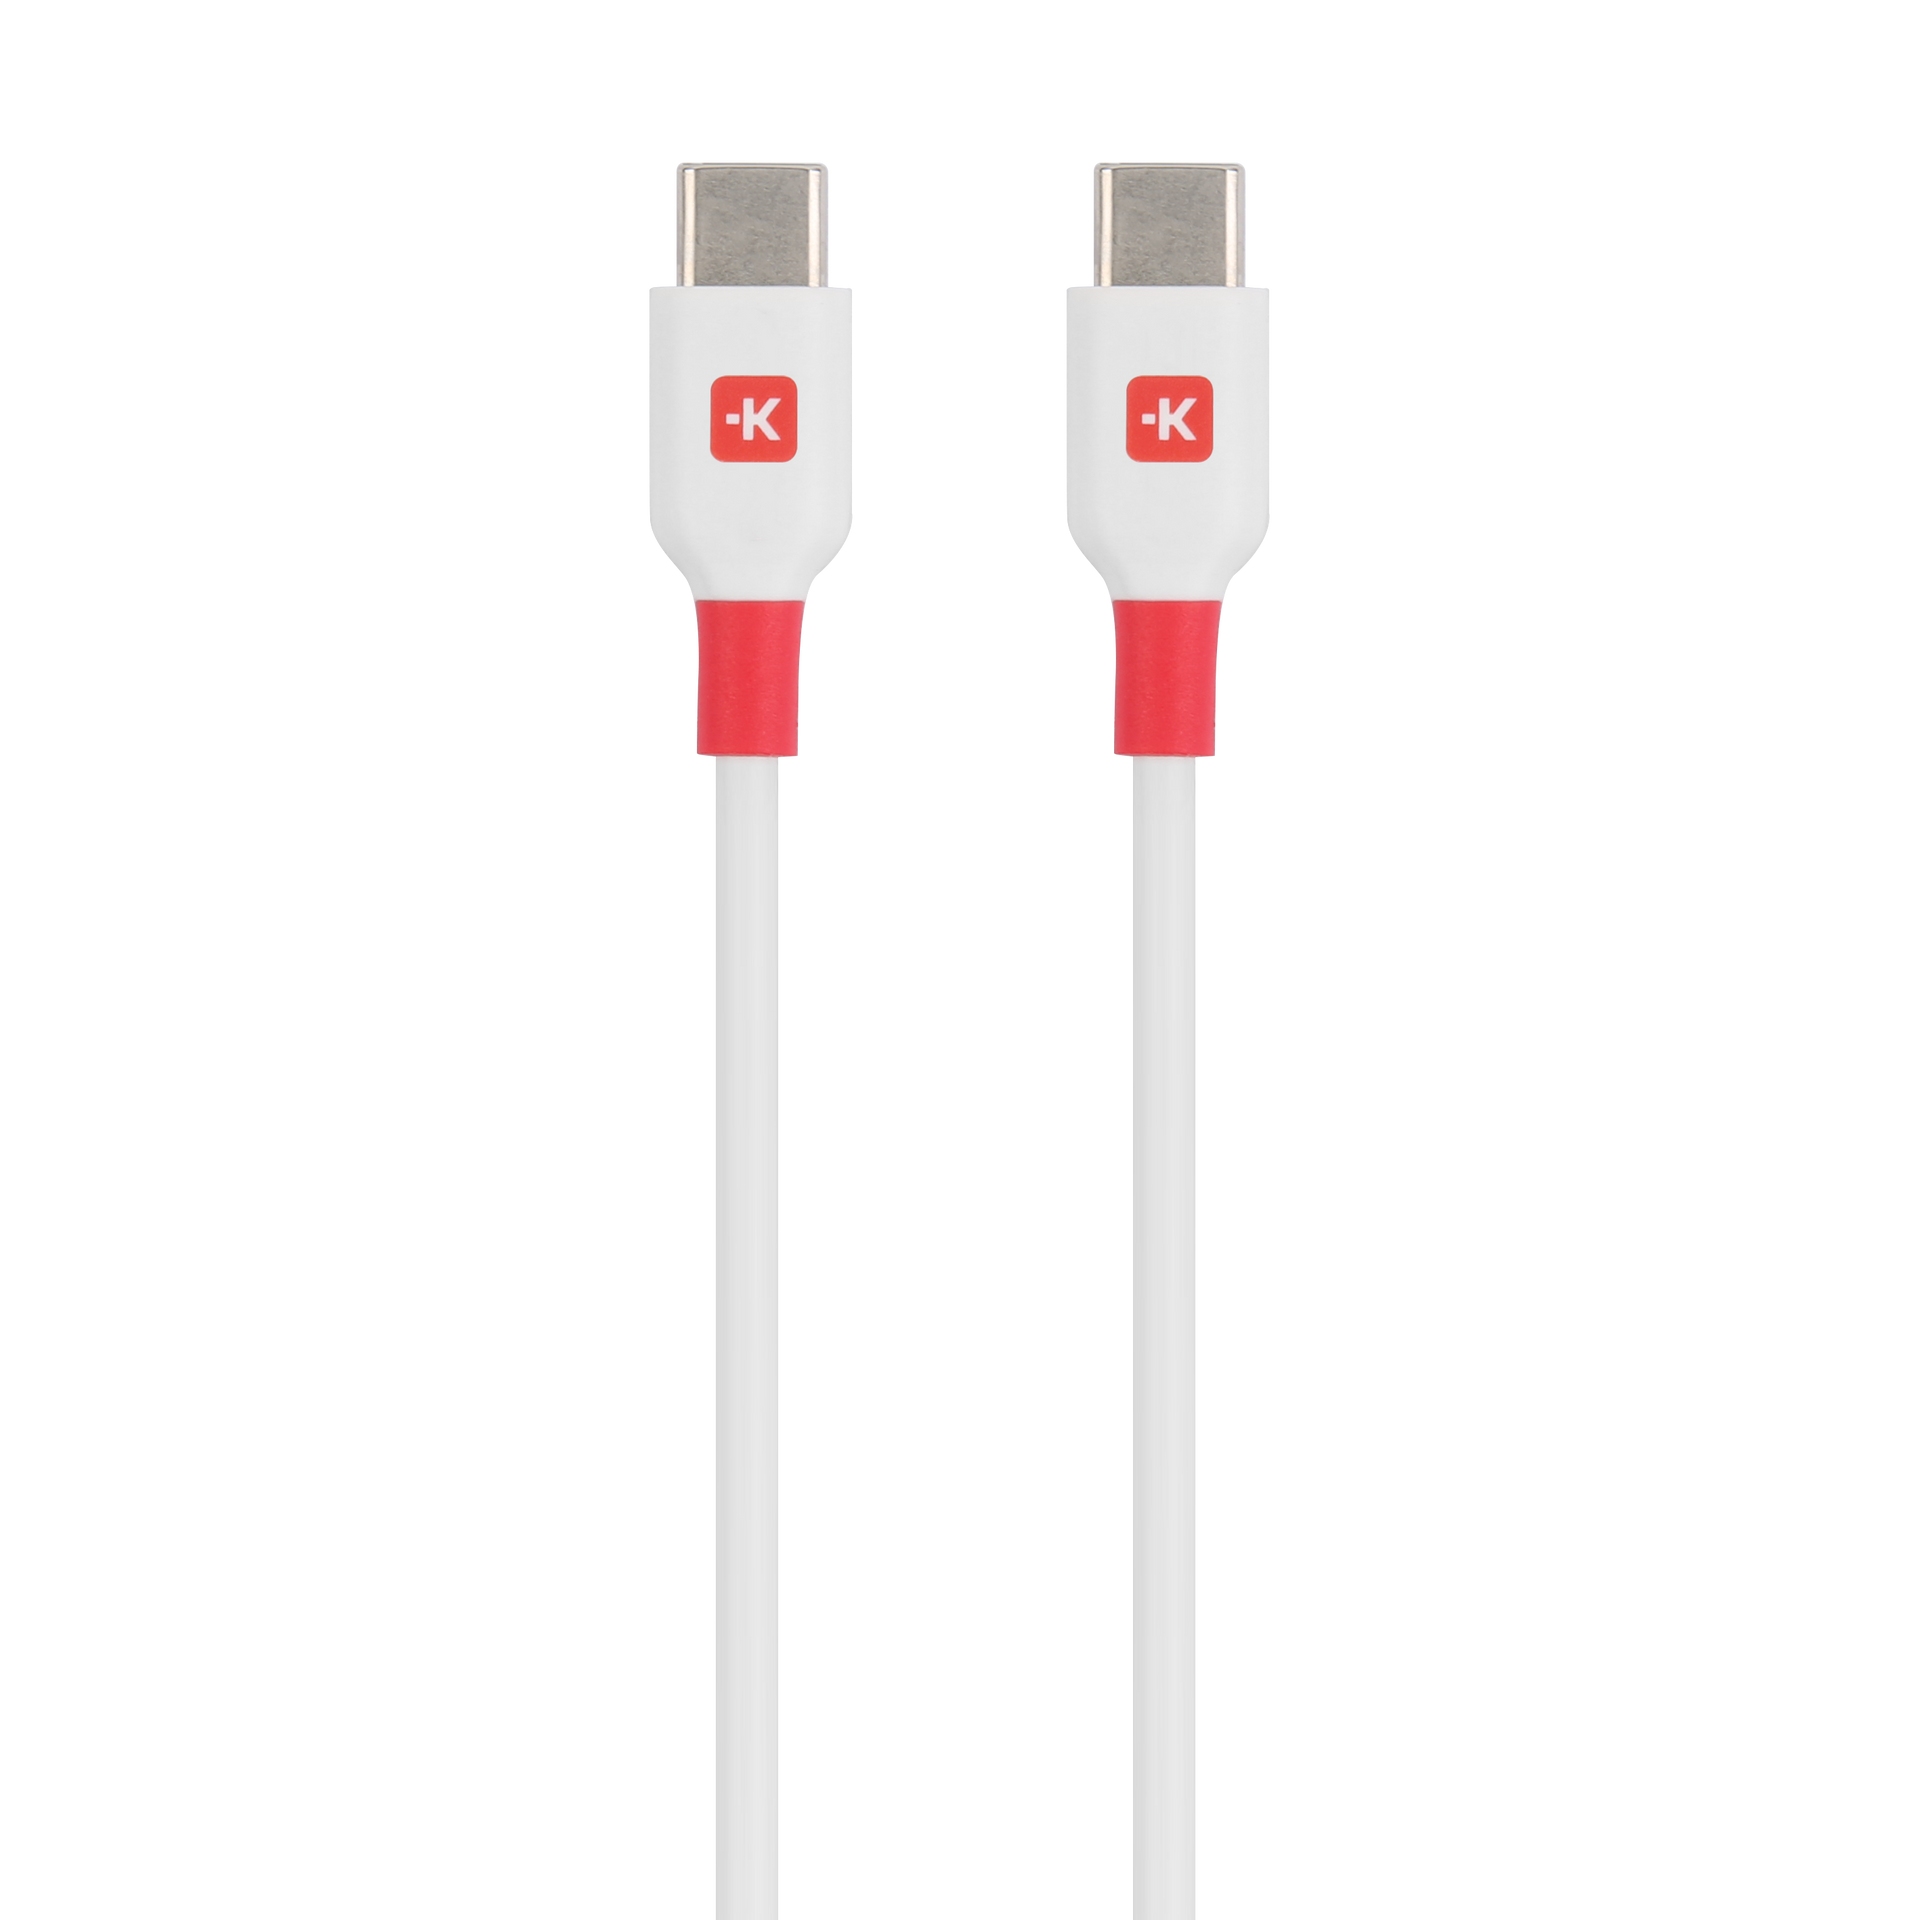 Skross USB-C to USB-C Charging Cable Multipack